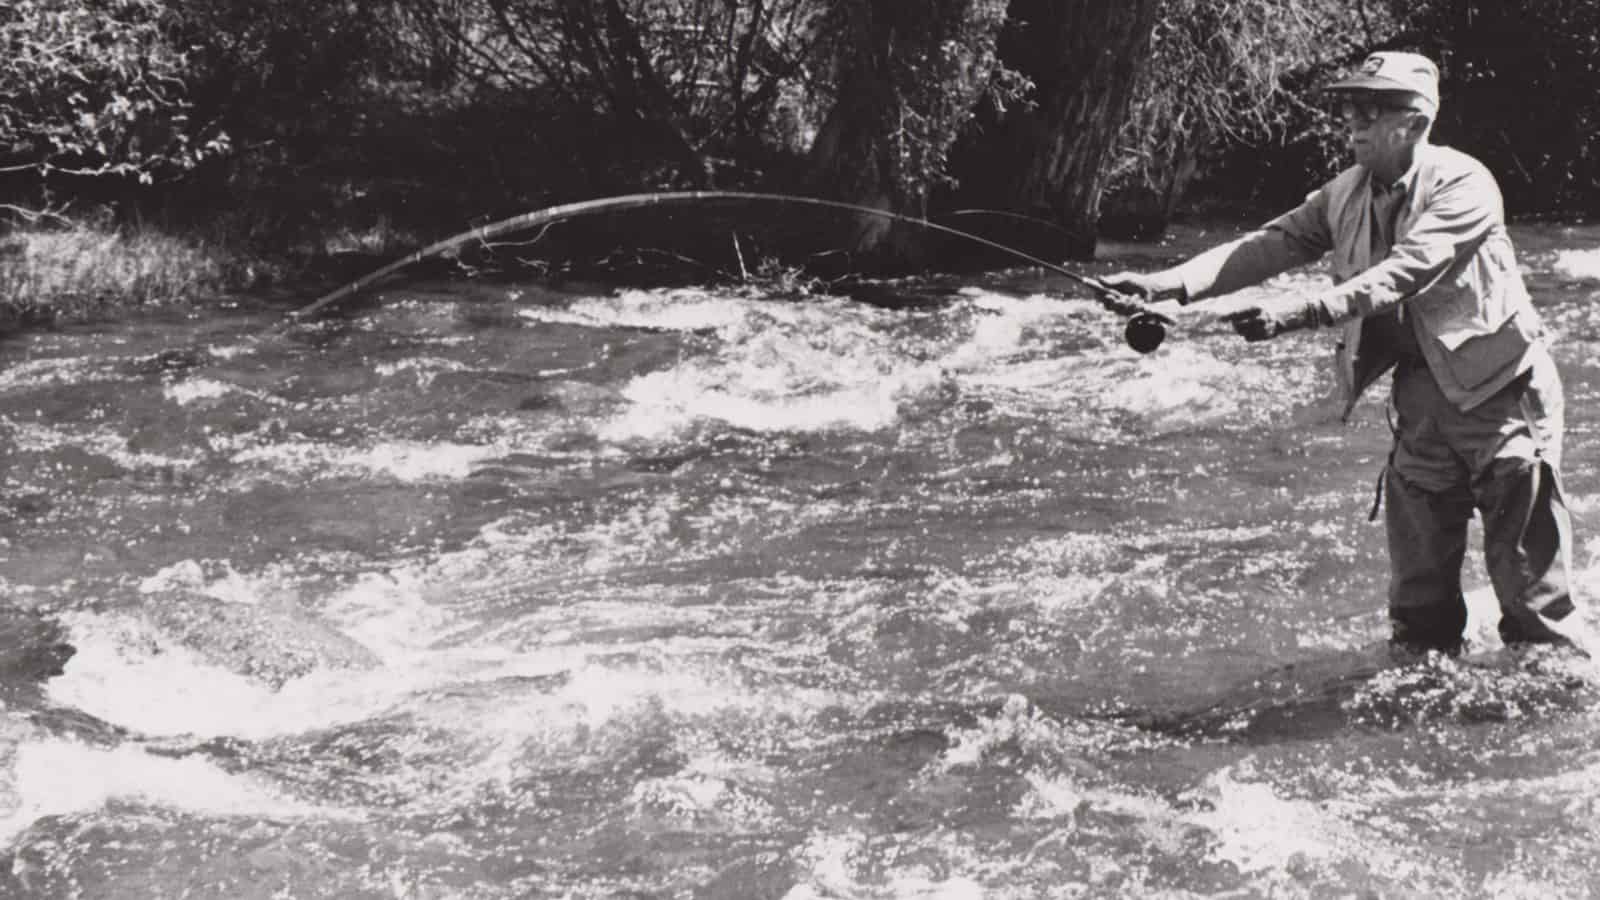 Photo of Kenneth McAfee trout fishing in 1960